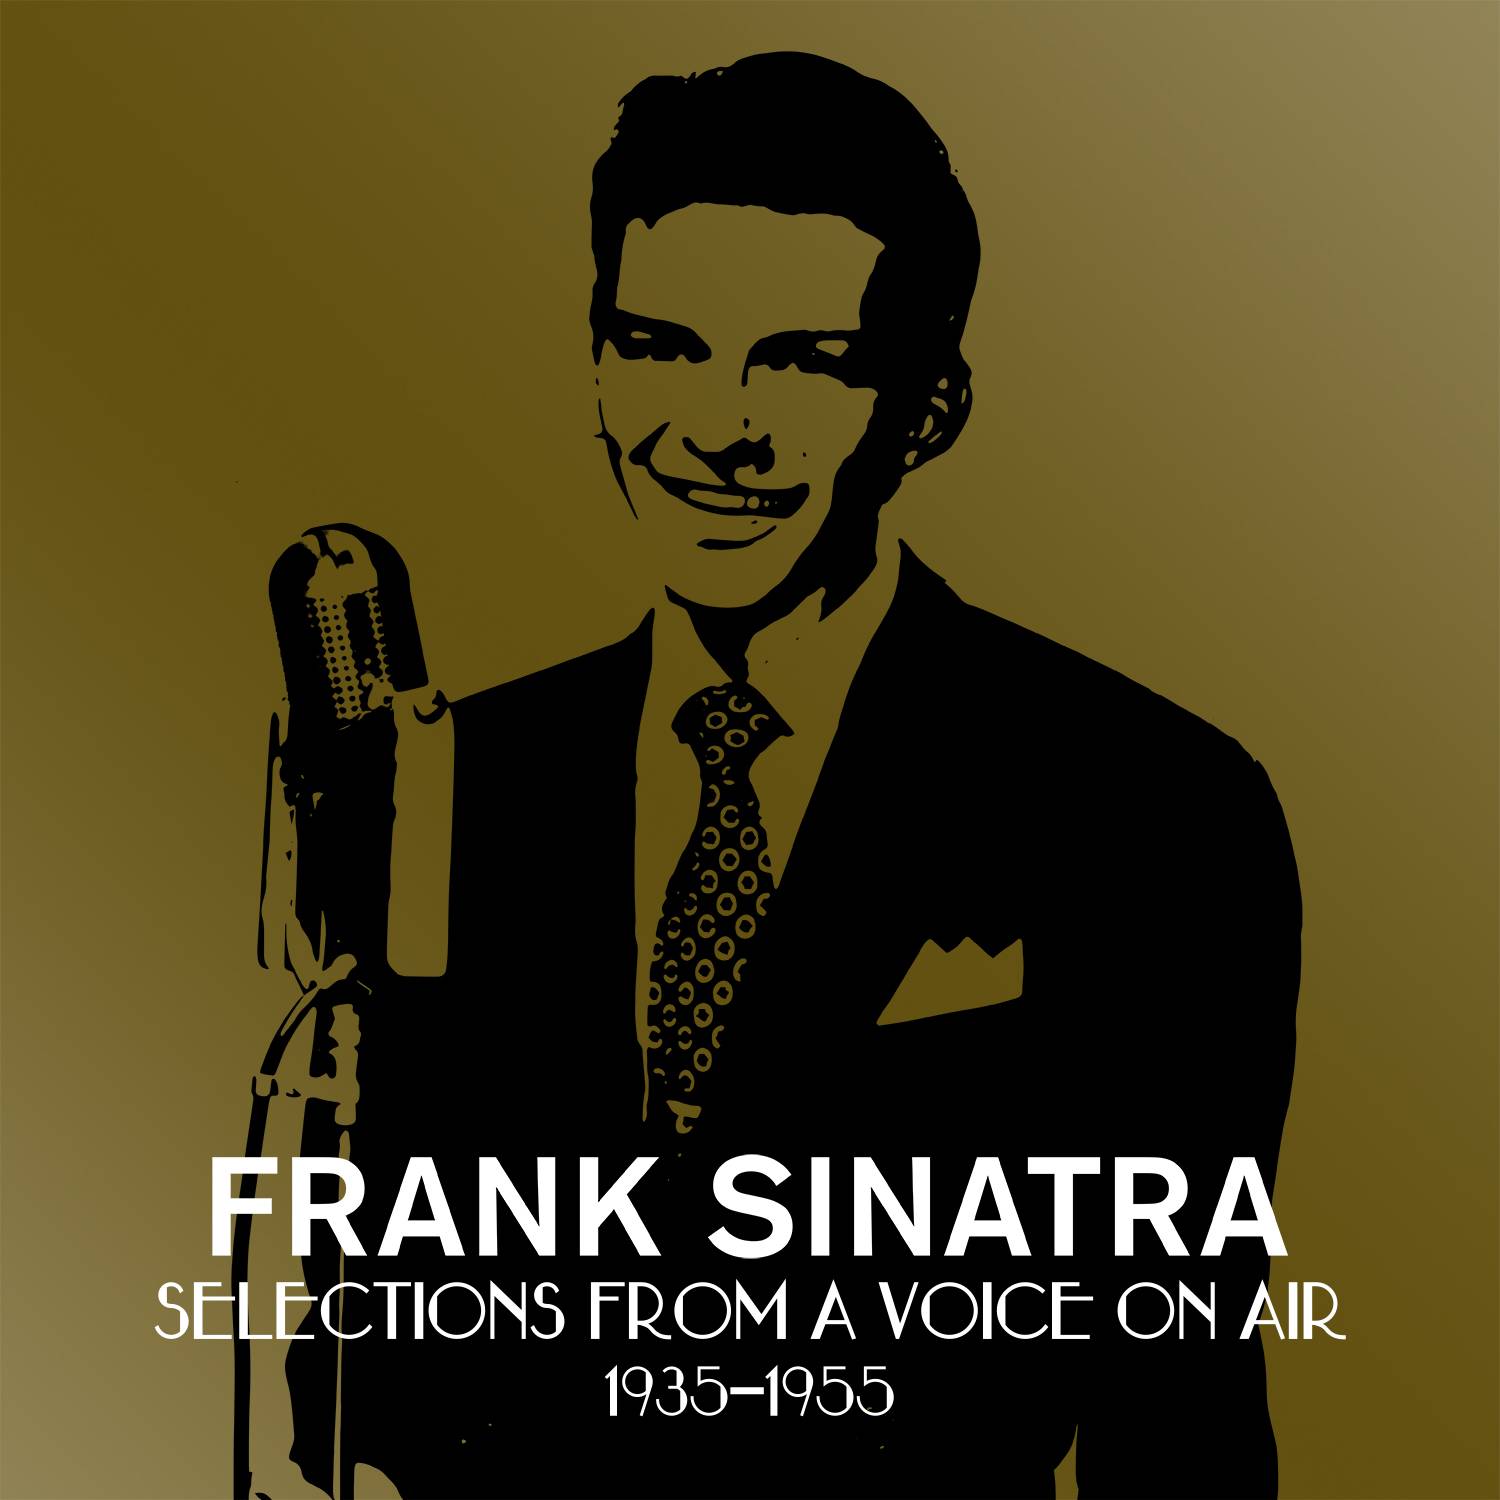 Songs by Sinatra Old Gold "Yankee Doodle Dandy" Commercial